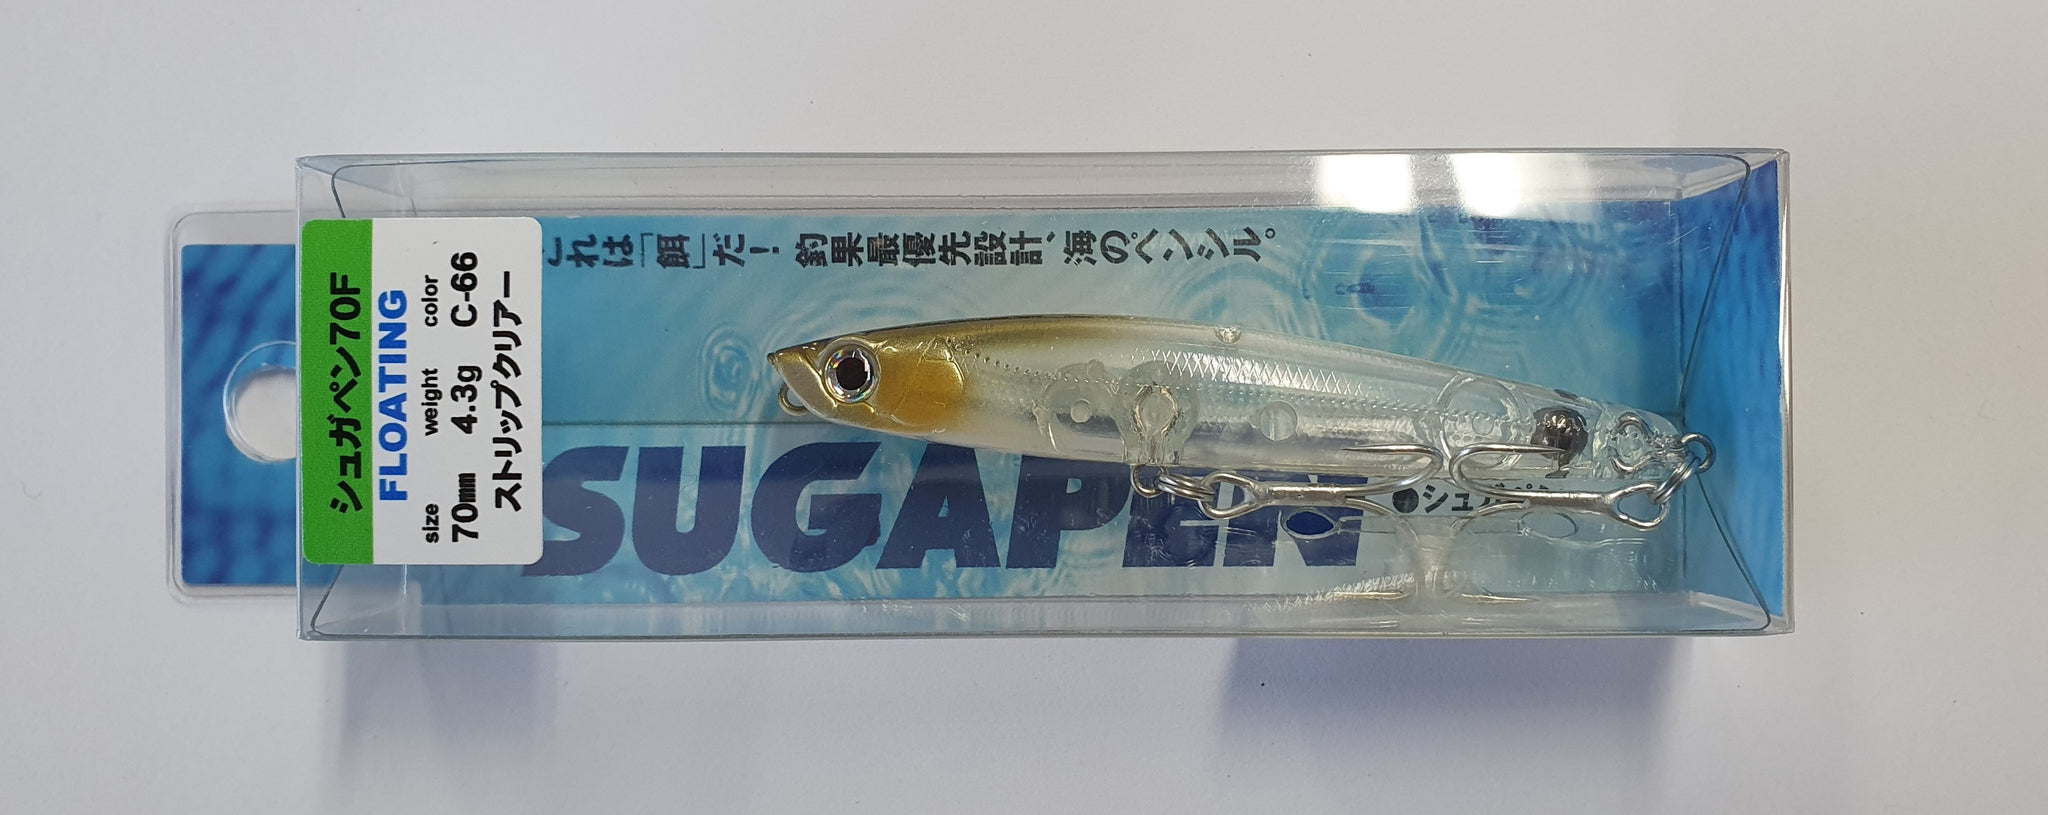 Bassday Sugar Pen 70f Floating Lure 4.3 Grams Hh-16 - 9064 for sale online